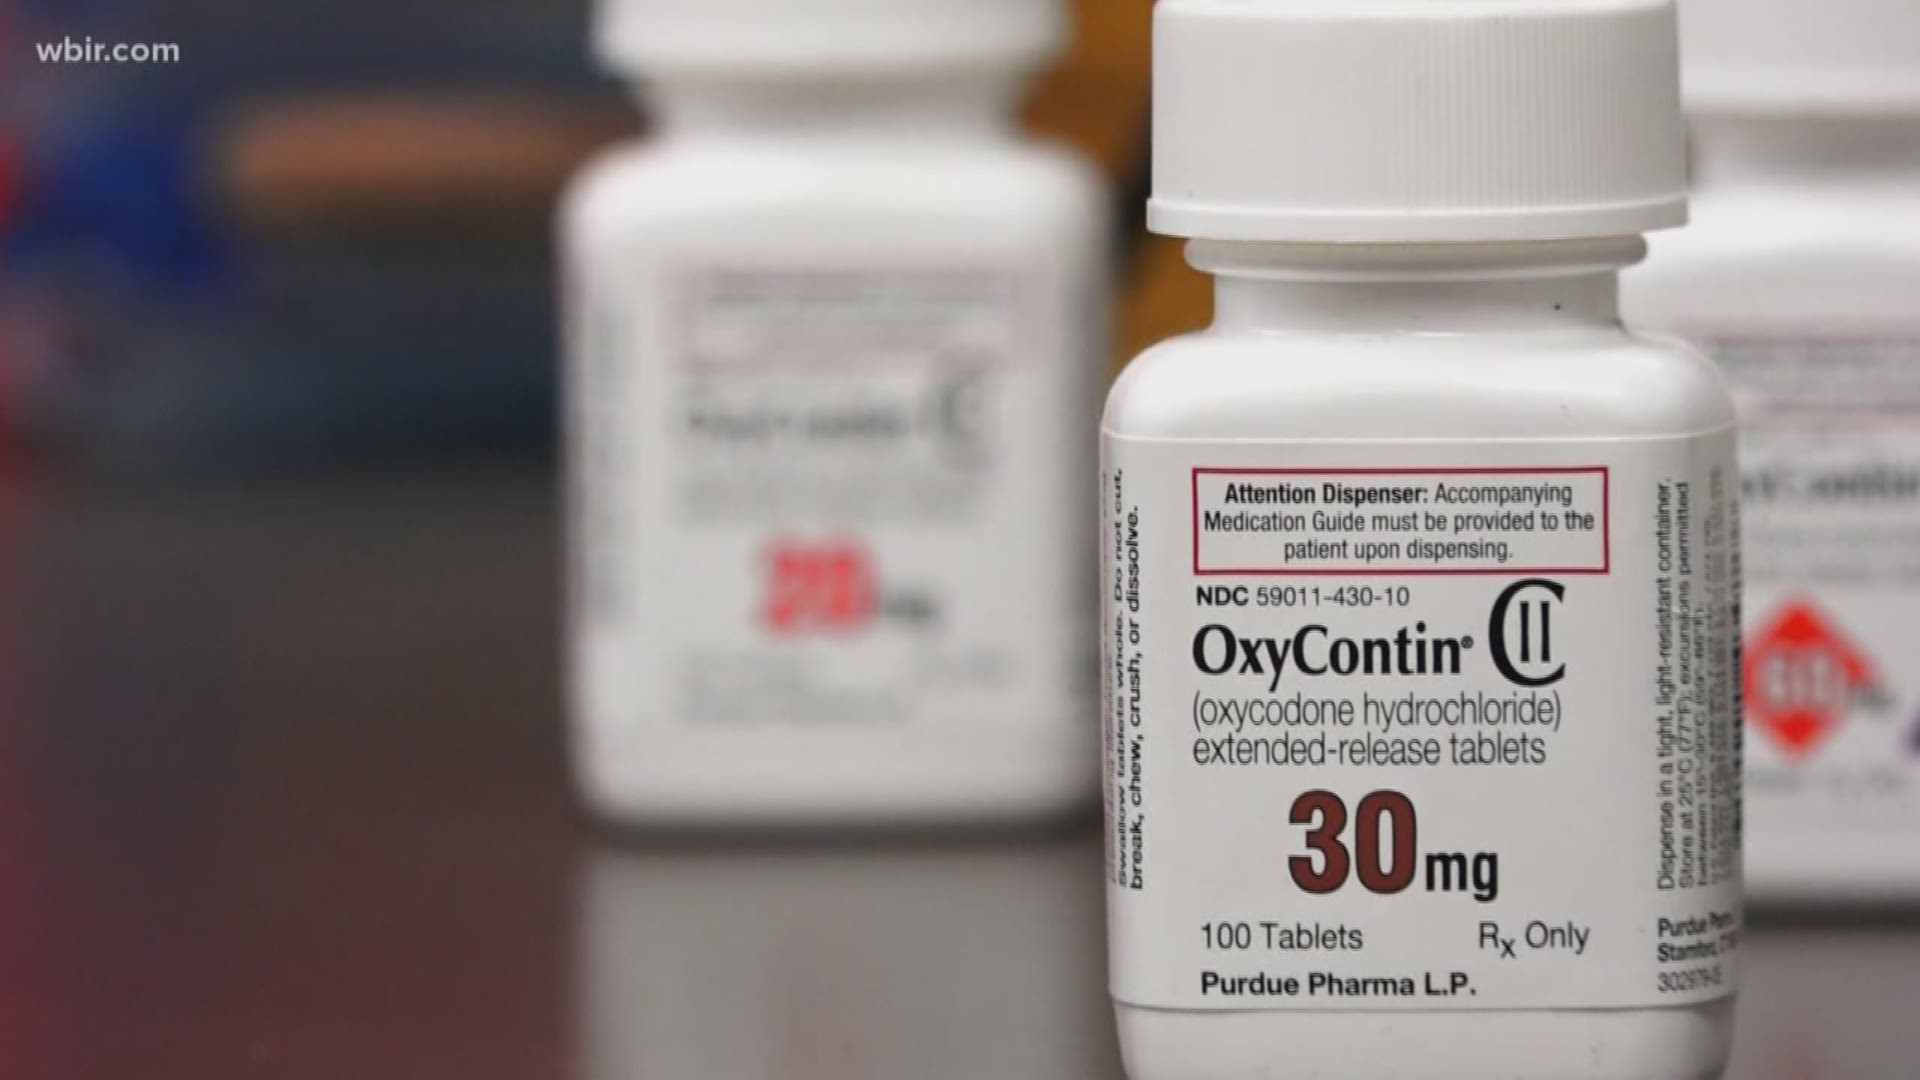 The largest health insurance company in Tennessee will stop covering OxyContin prescriptions next year as part of sweeping policy changes intended to combat opioid addiction and make pain pills less valuable on the black market.